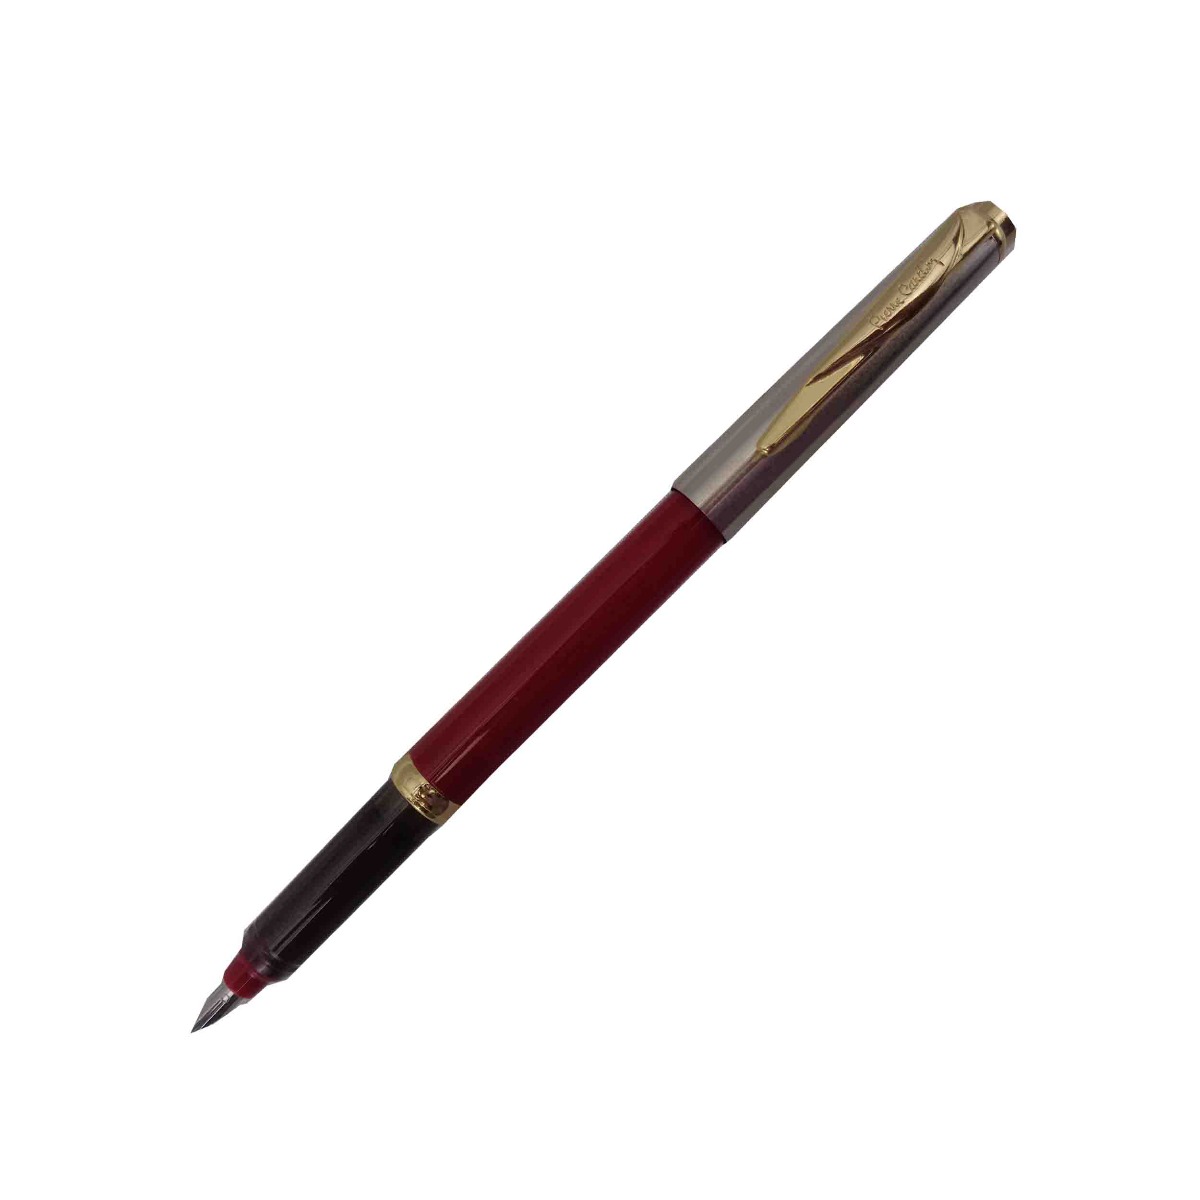 Pierre Cardin Momento Half GoldModel:15613 Red Color Body With Silver Cap Type Fine Nib With 1 Ink Converter and 2 Extra Long Catridge Fountain Pen